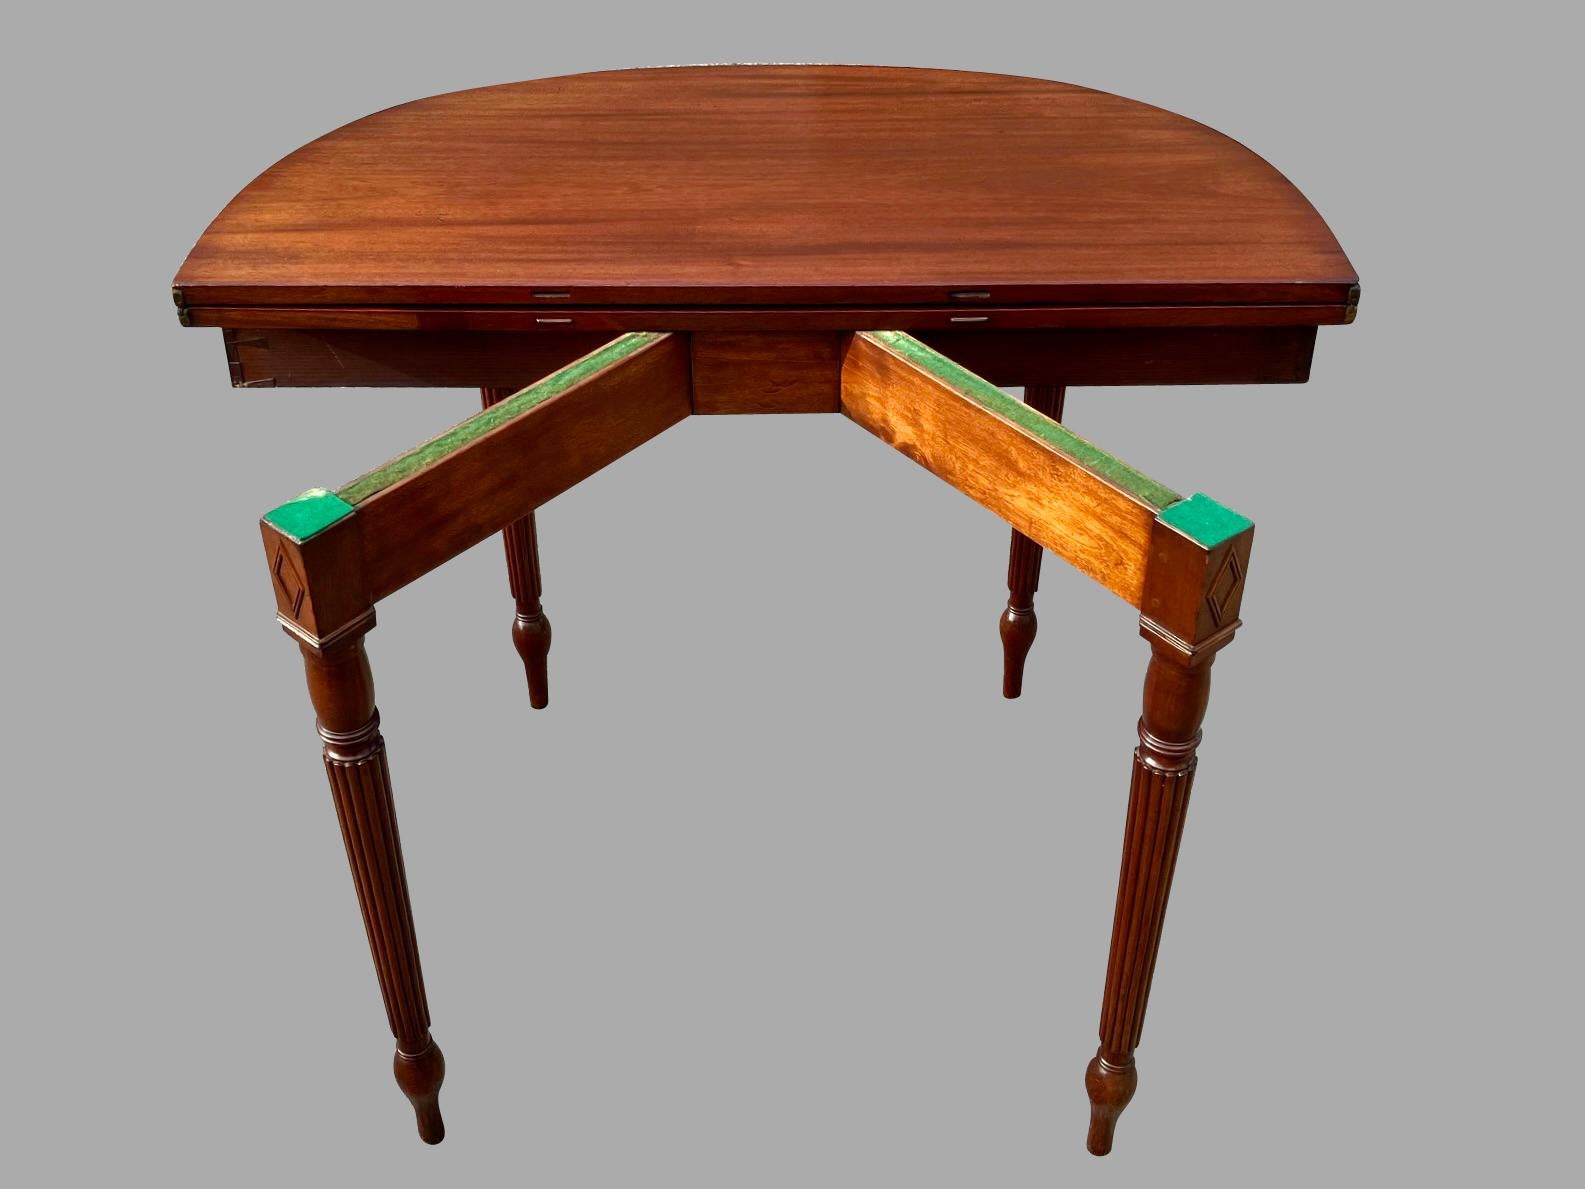 English Regency Period Mahogany Flip Top Game or Tea Table with Reeded Legs For Sale 1